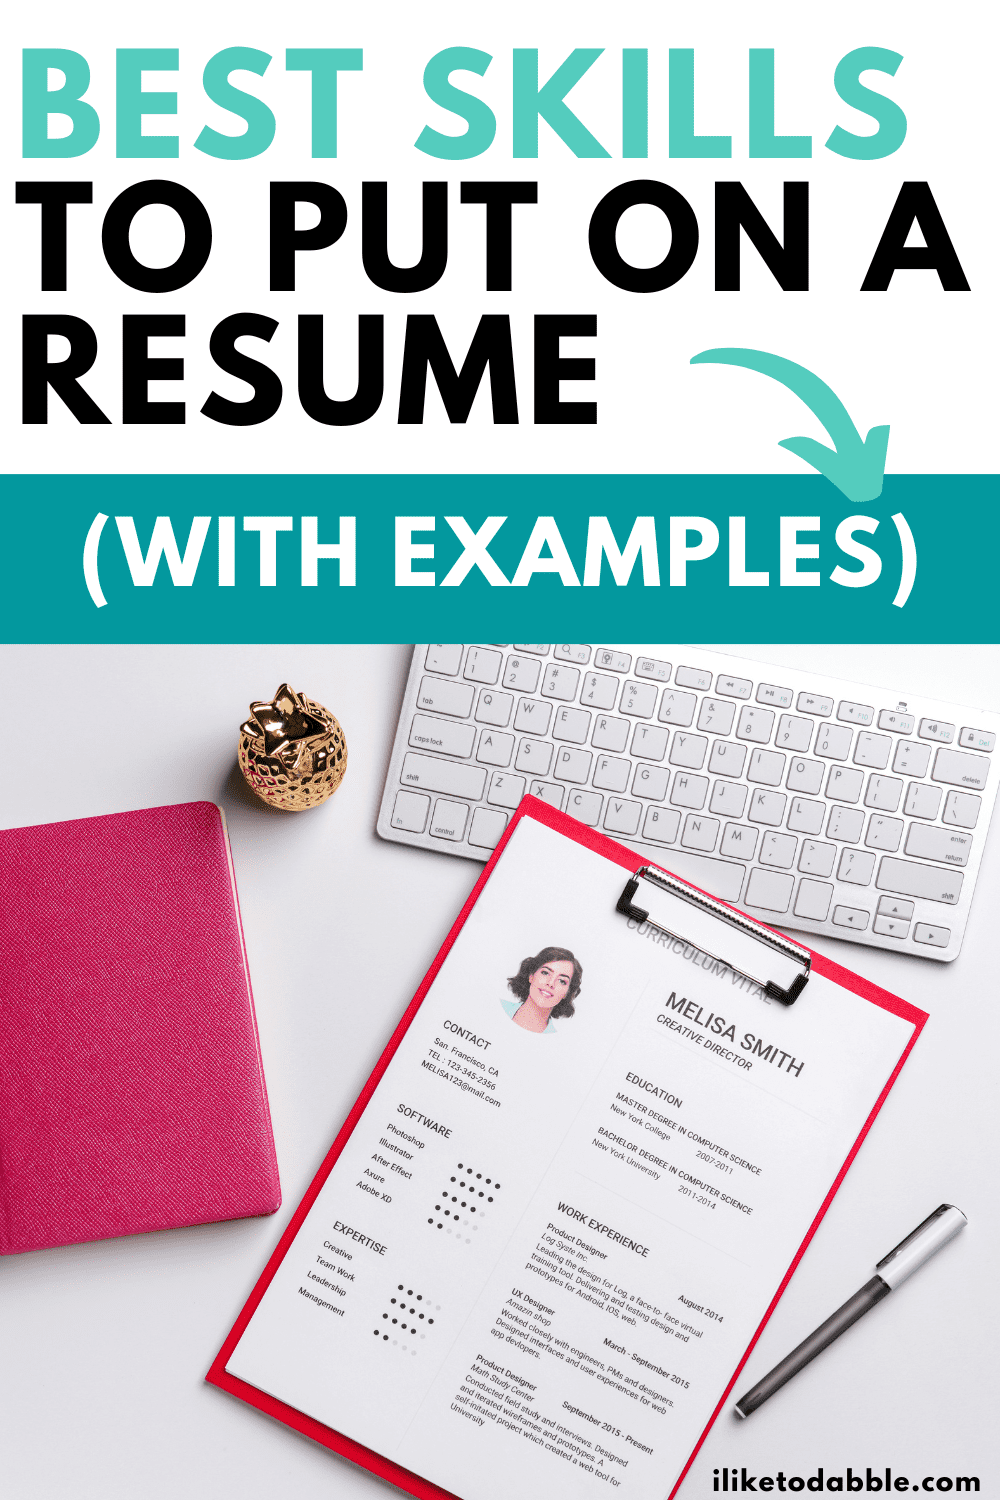 Best skills to put on a resume pinnable image with a resume on a desk and title text